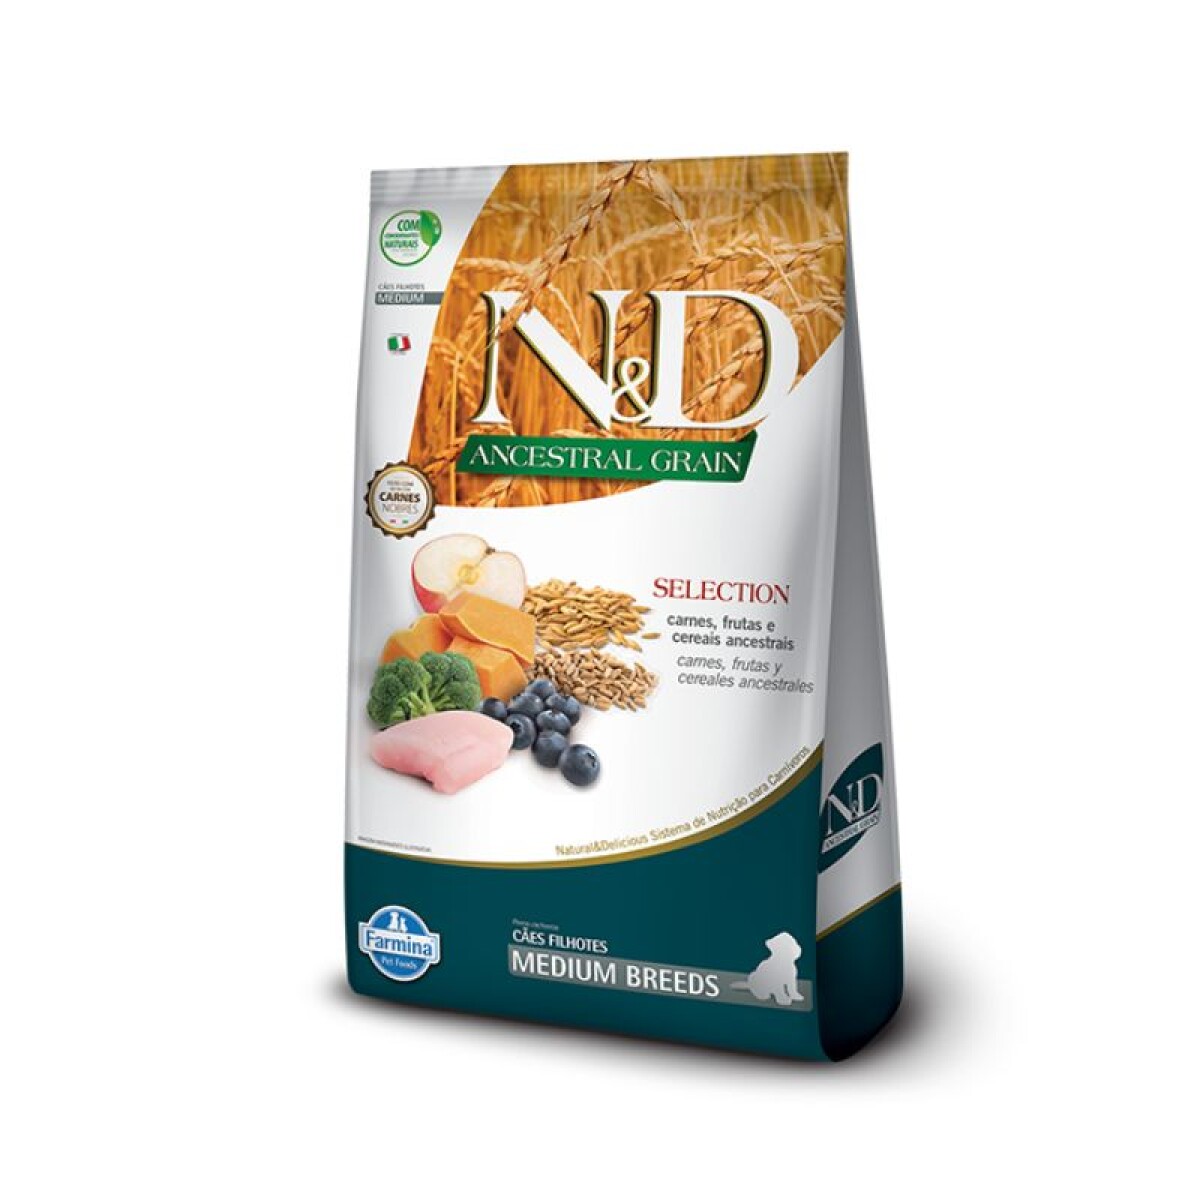 ND ANCESTRAL CAN PUPPY MEDIANO 2,5 KG - Nd Ancestral Can Puppy Mediano 2,5 Kg 